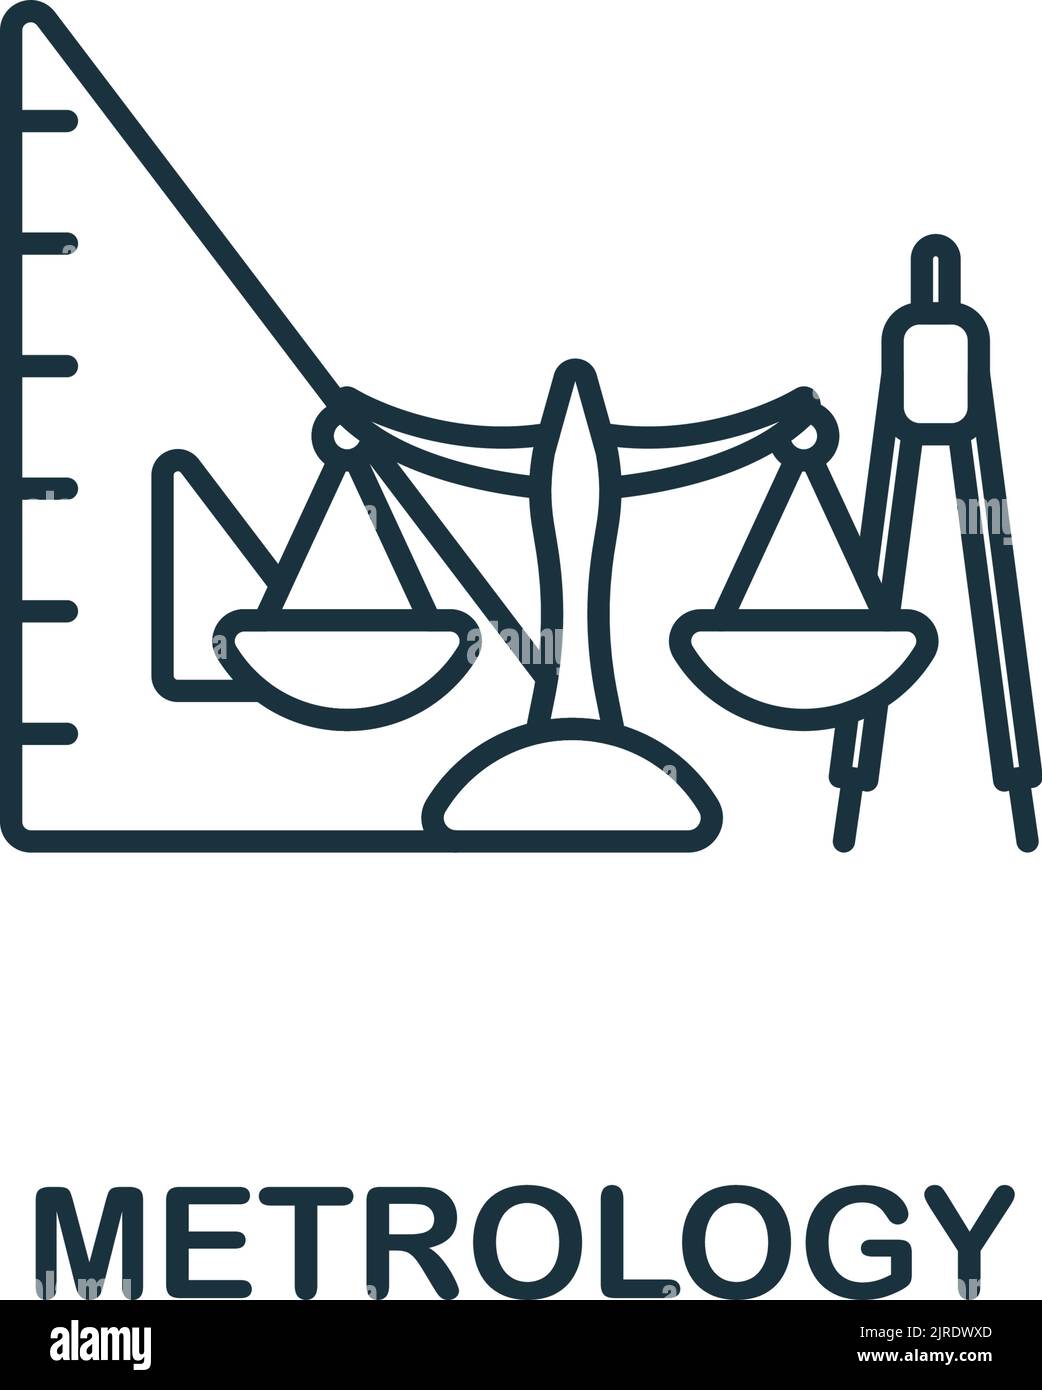 Metrology icon. Line simple Science icon for templates, web design and infographics Stock Vector